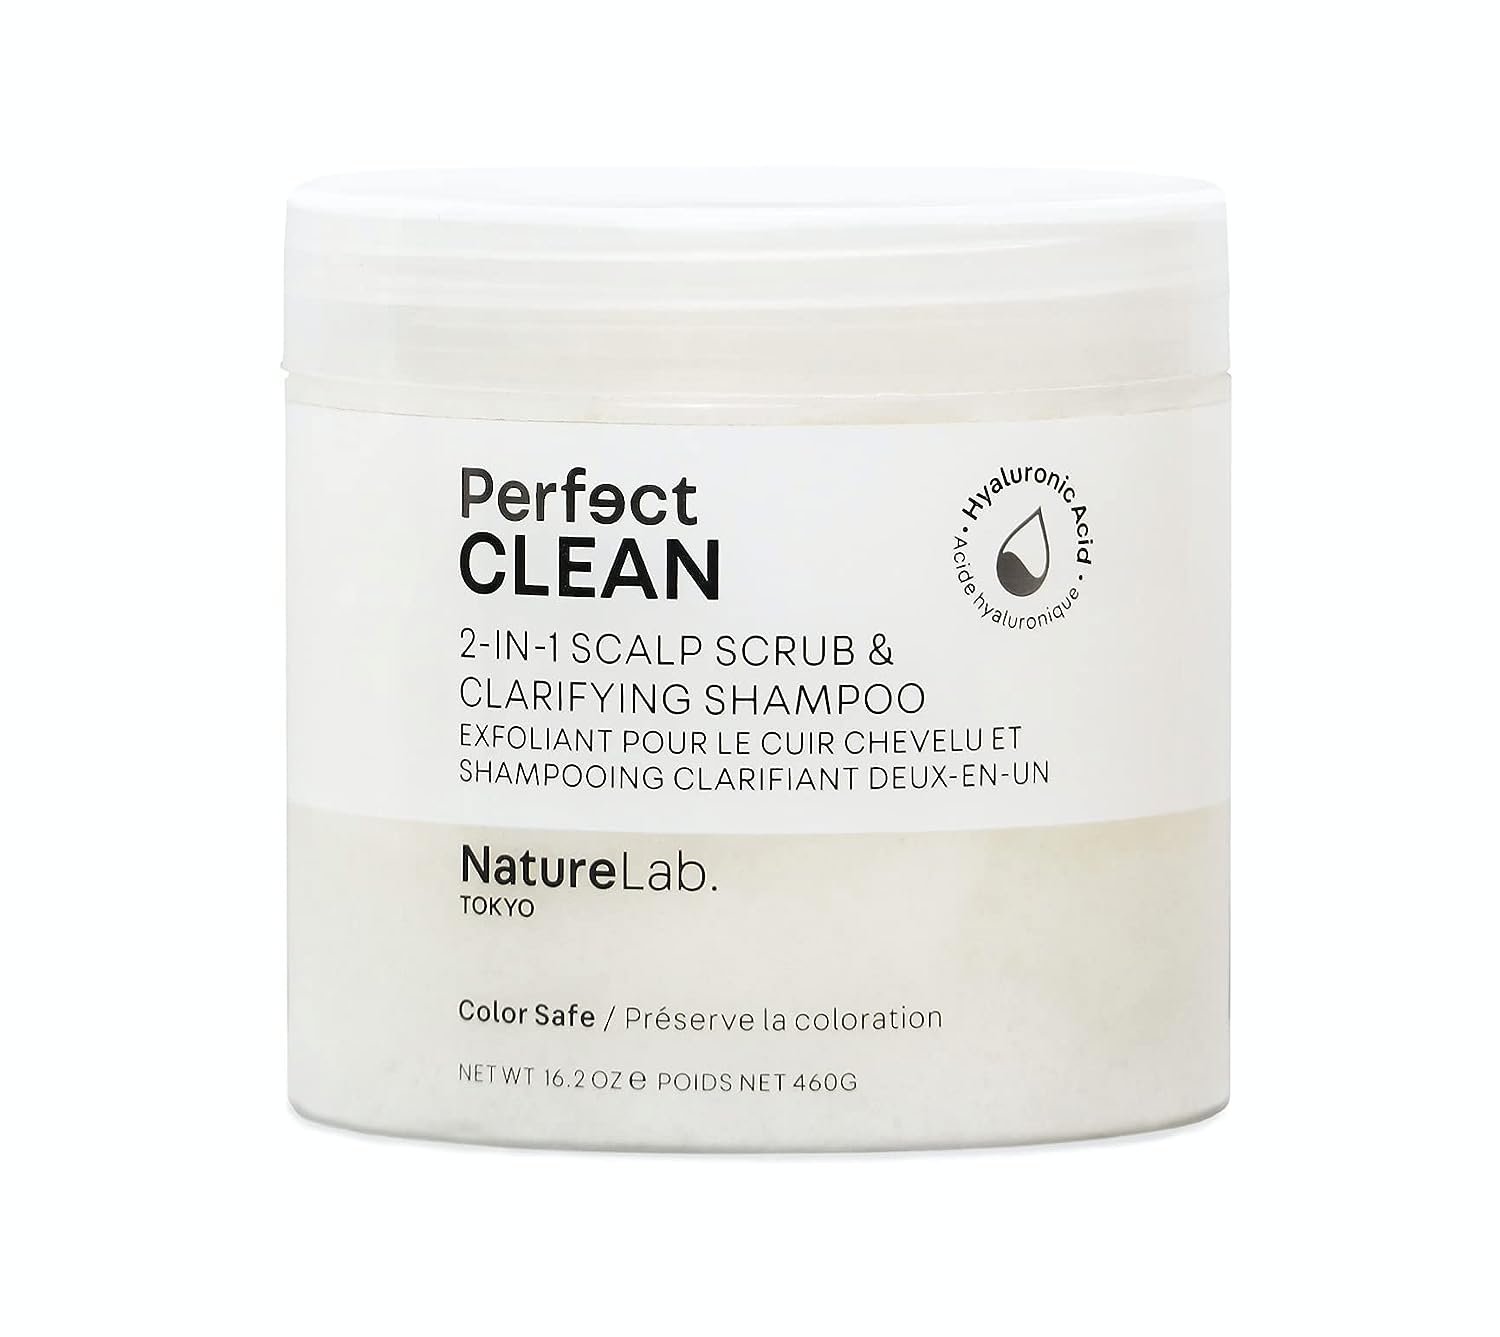 NatureLab Tokyo Perfect Clean Clarifying Scalp Scrub: 2-in-1 Shampoo and Scalp Scrub Hair Treatment to Clarify and Remove Product Buildup for Immense Shine I Jumbo 16.2  / 4